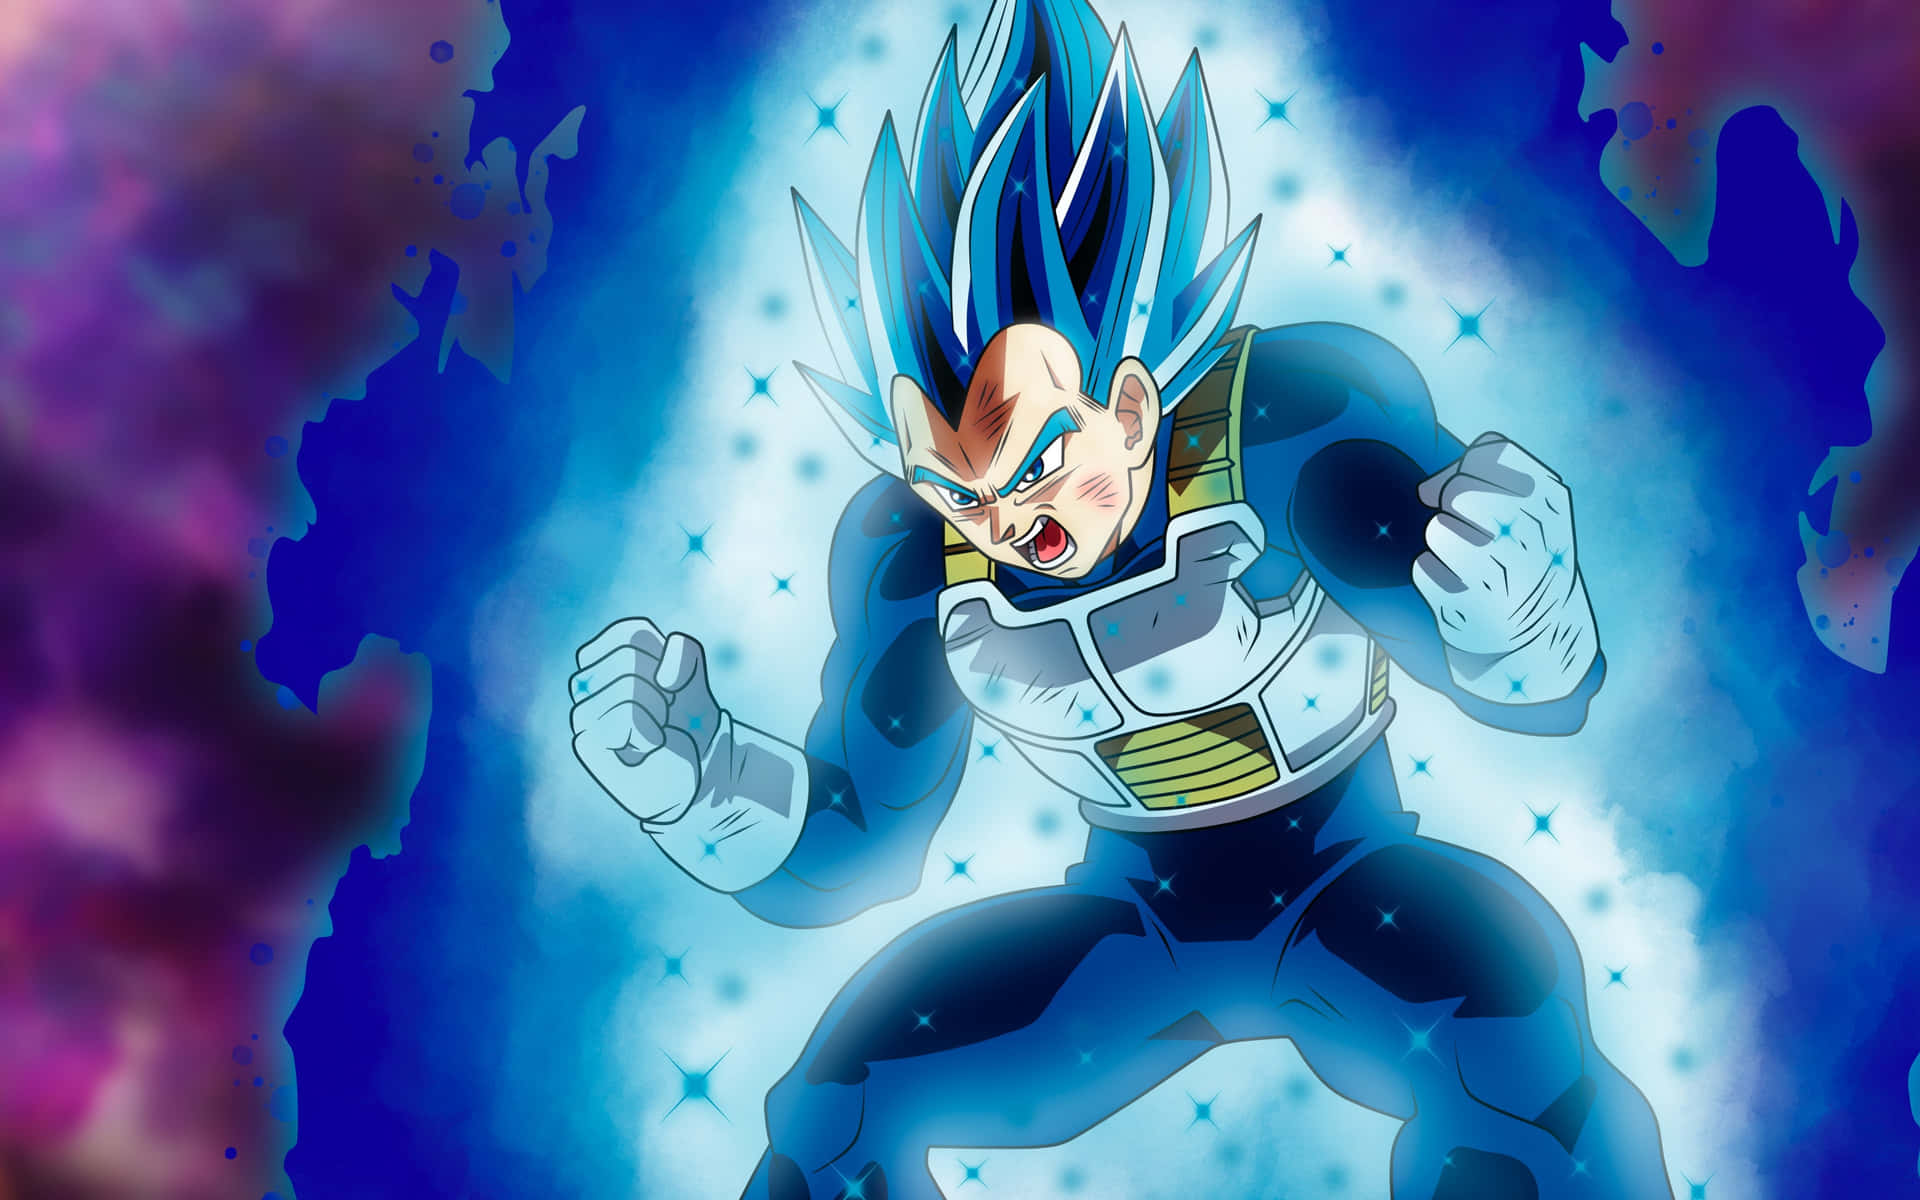 Embrace power with the epic Dragon Ball!